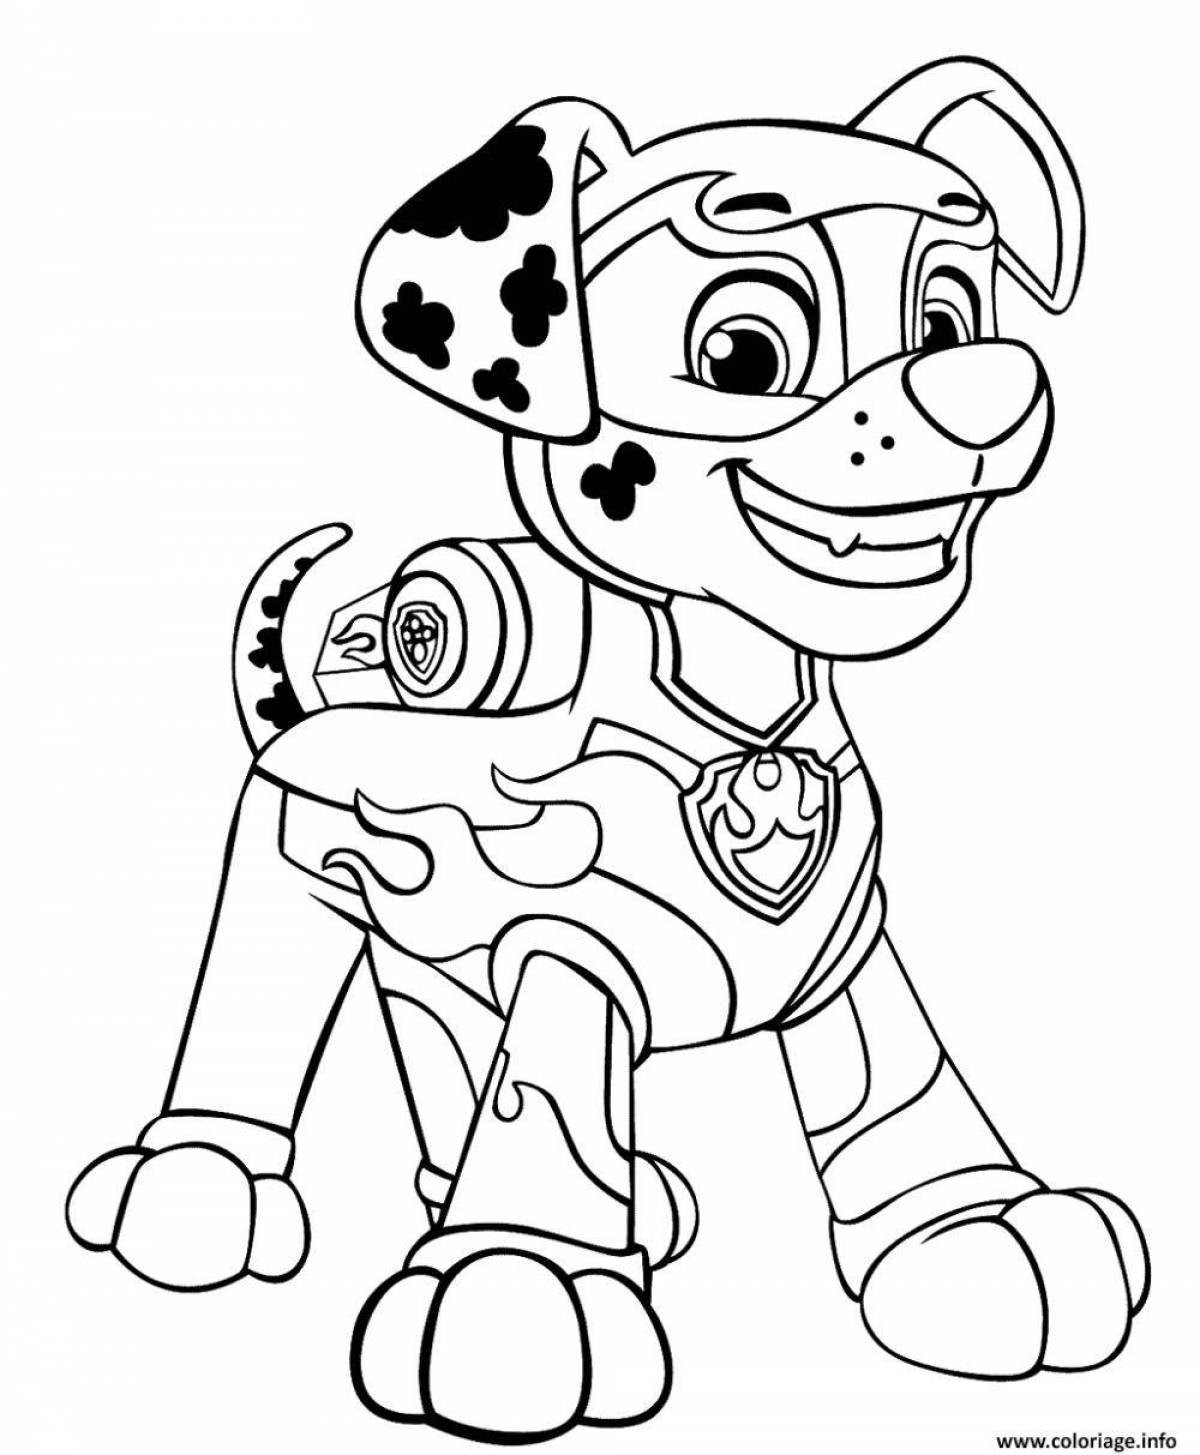 Exciting patrol coloring page